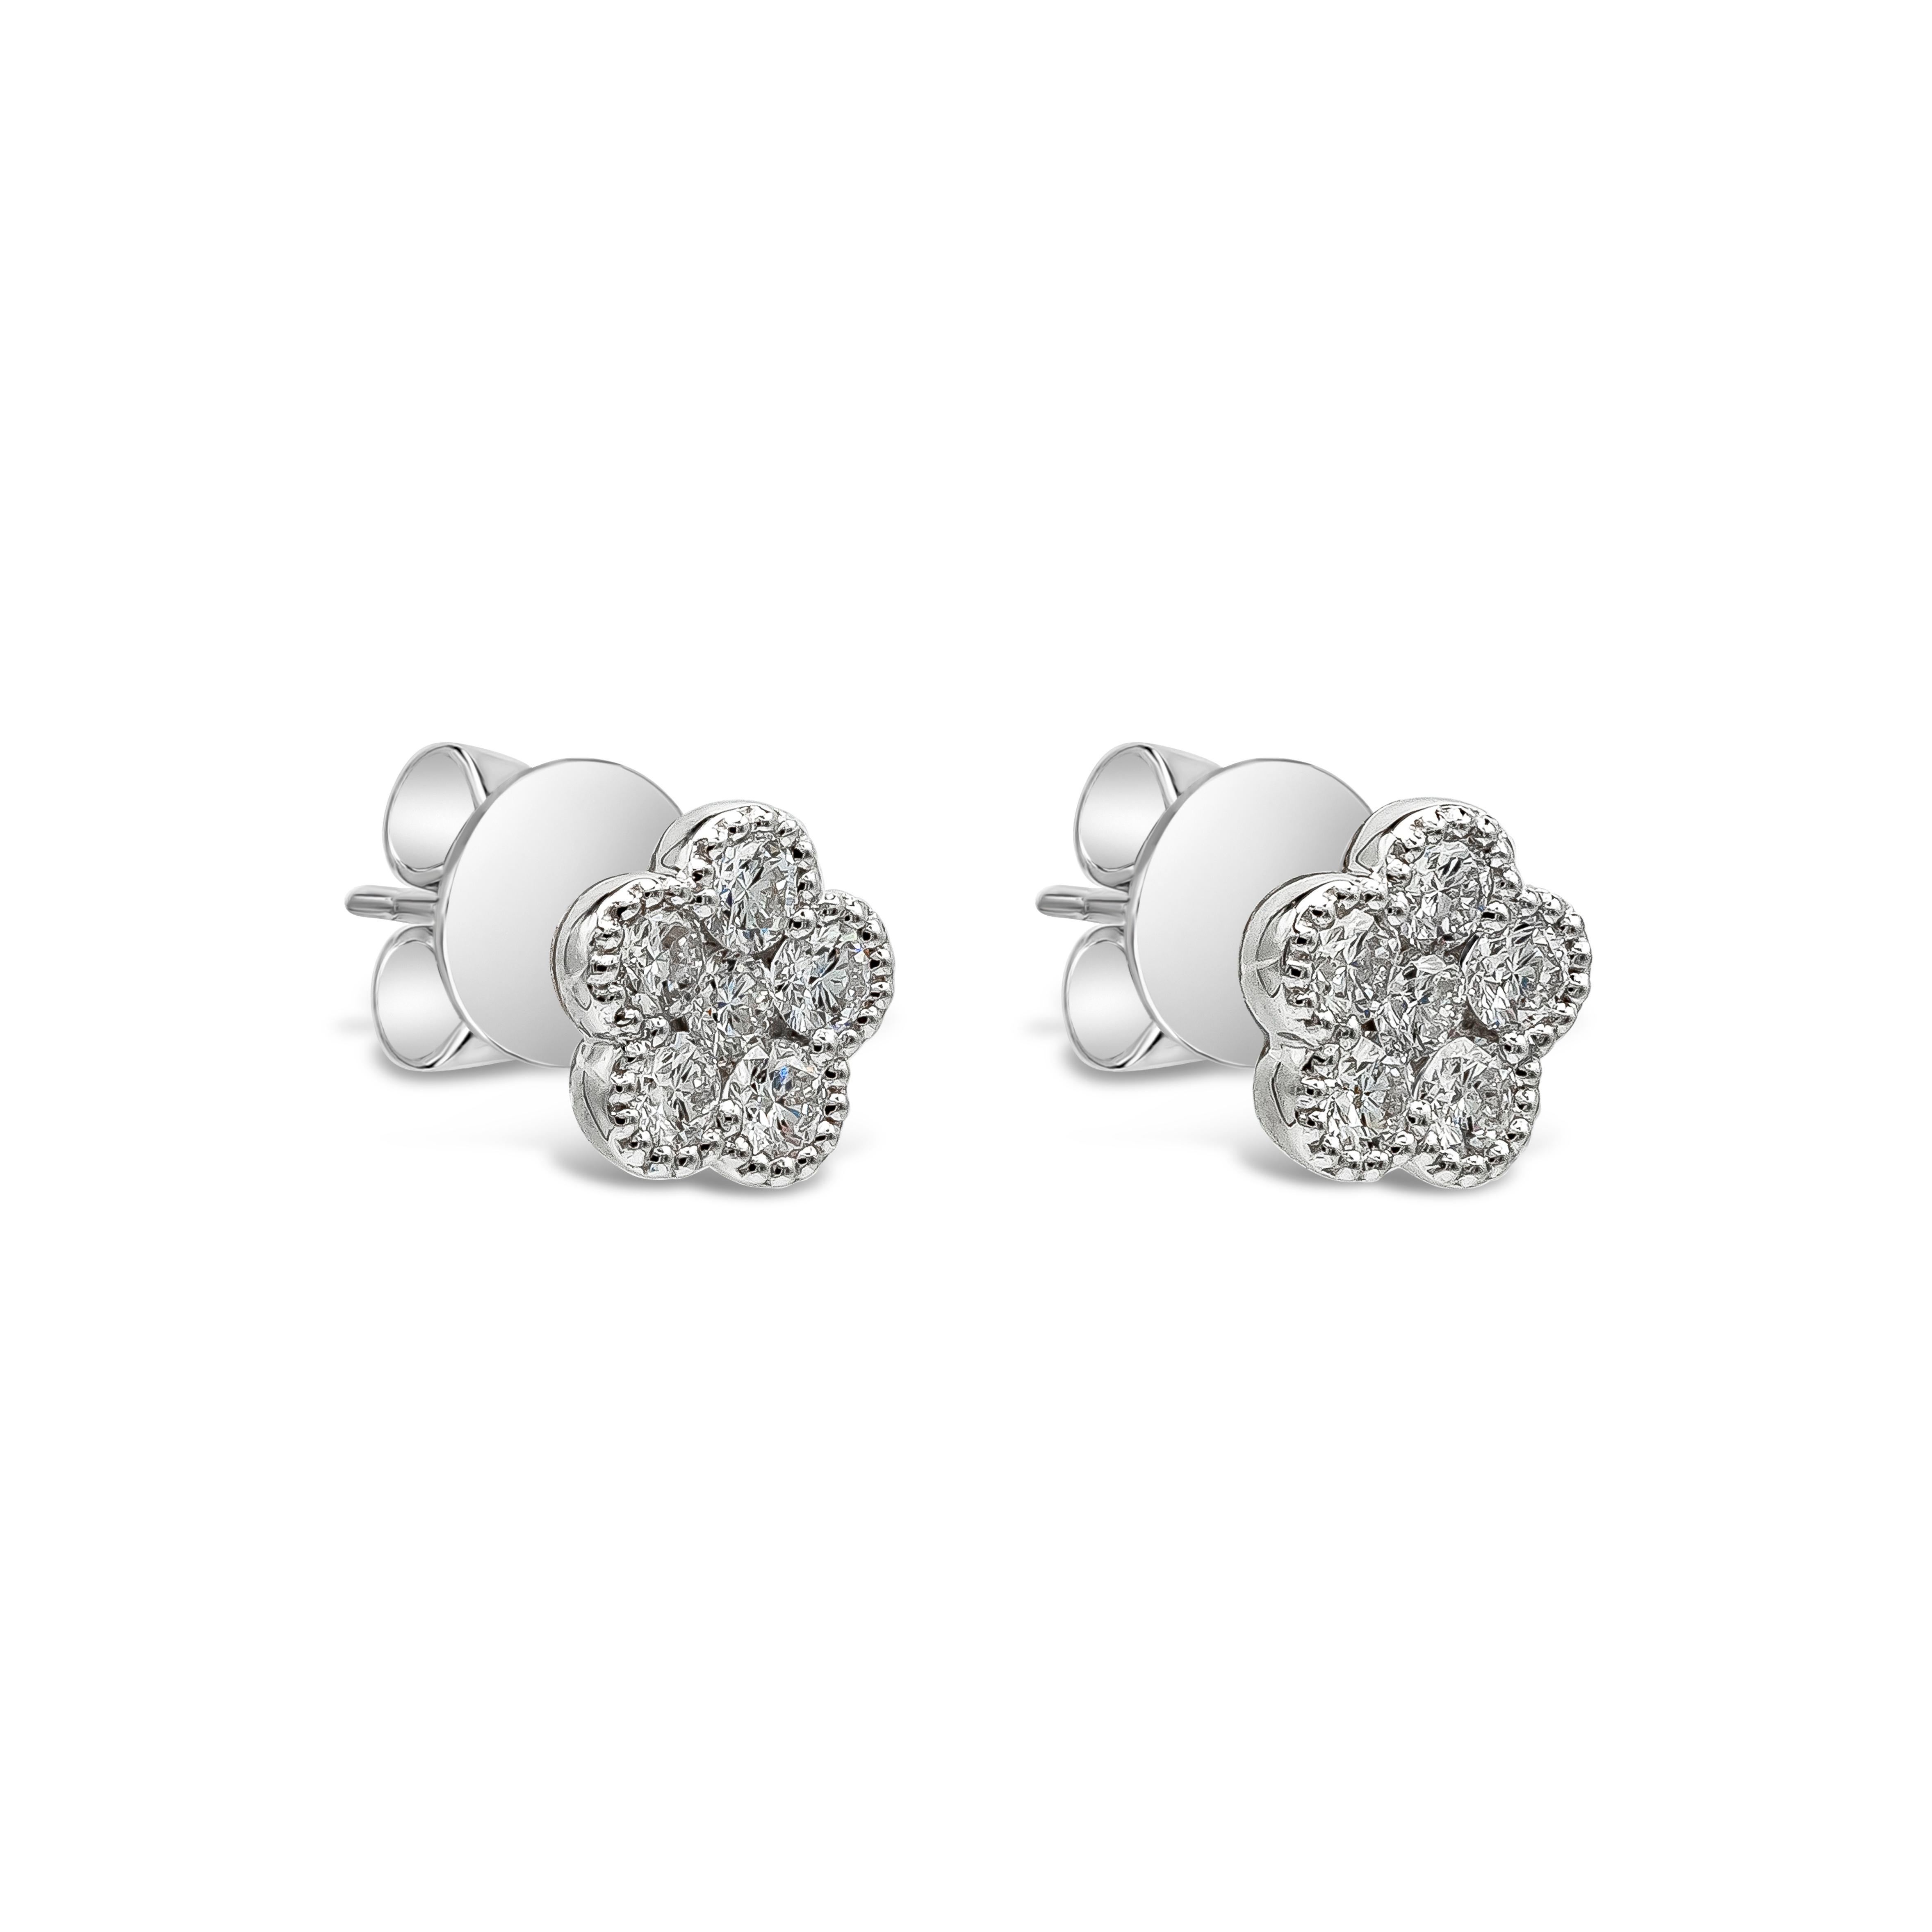 A simple and chic pair of stud earrings showcasing a cluster of round brilliant diamonds, arranged in a floral-motif design made in 18k white gold. Diamonds weigh 0.55 carats total and are approximately F-G color, VS-SI clarity.

Roman Malakov is a